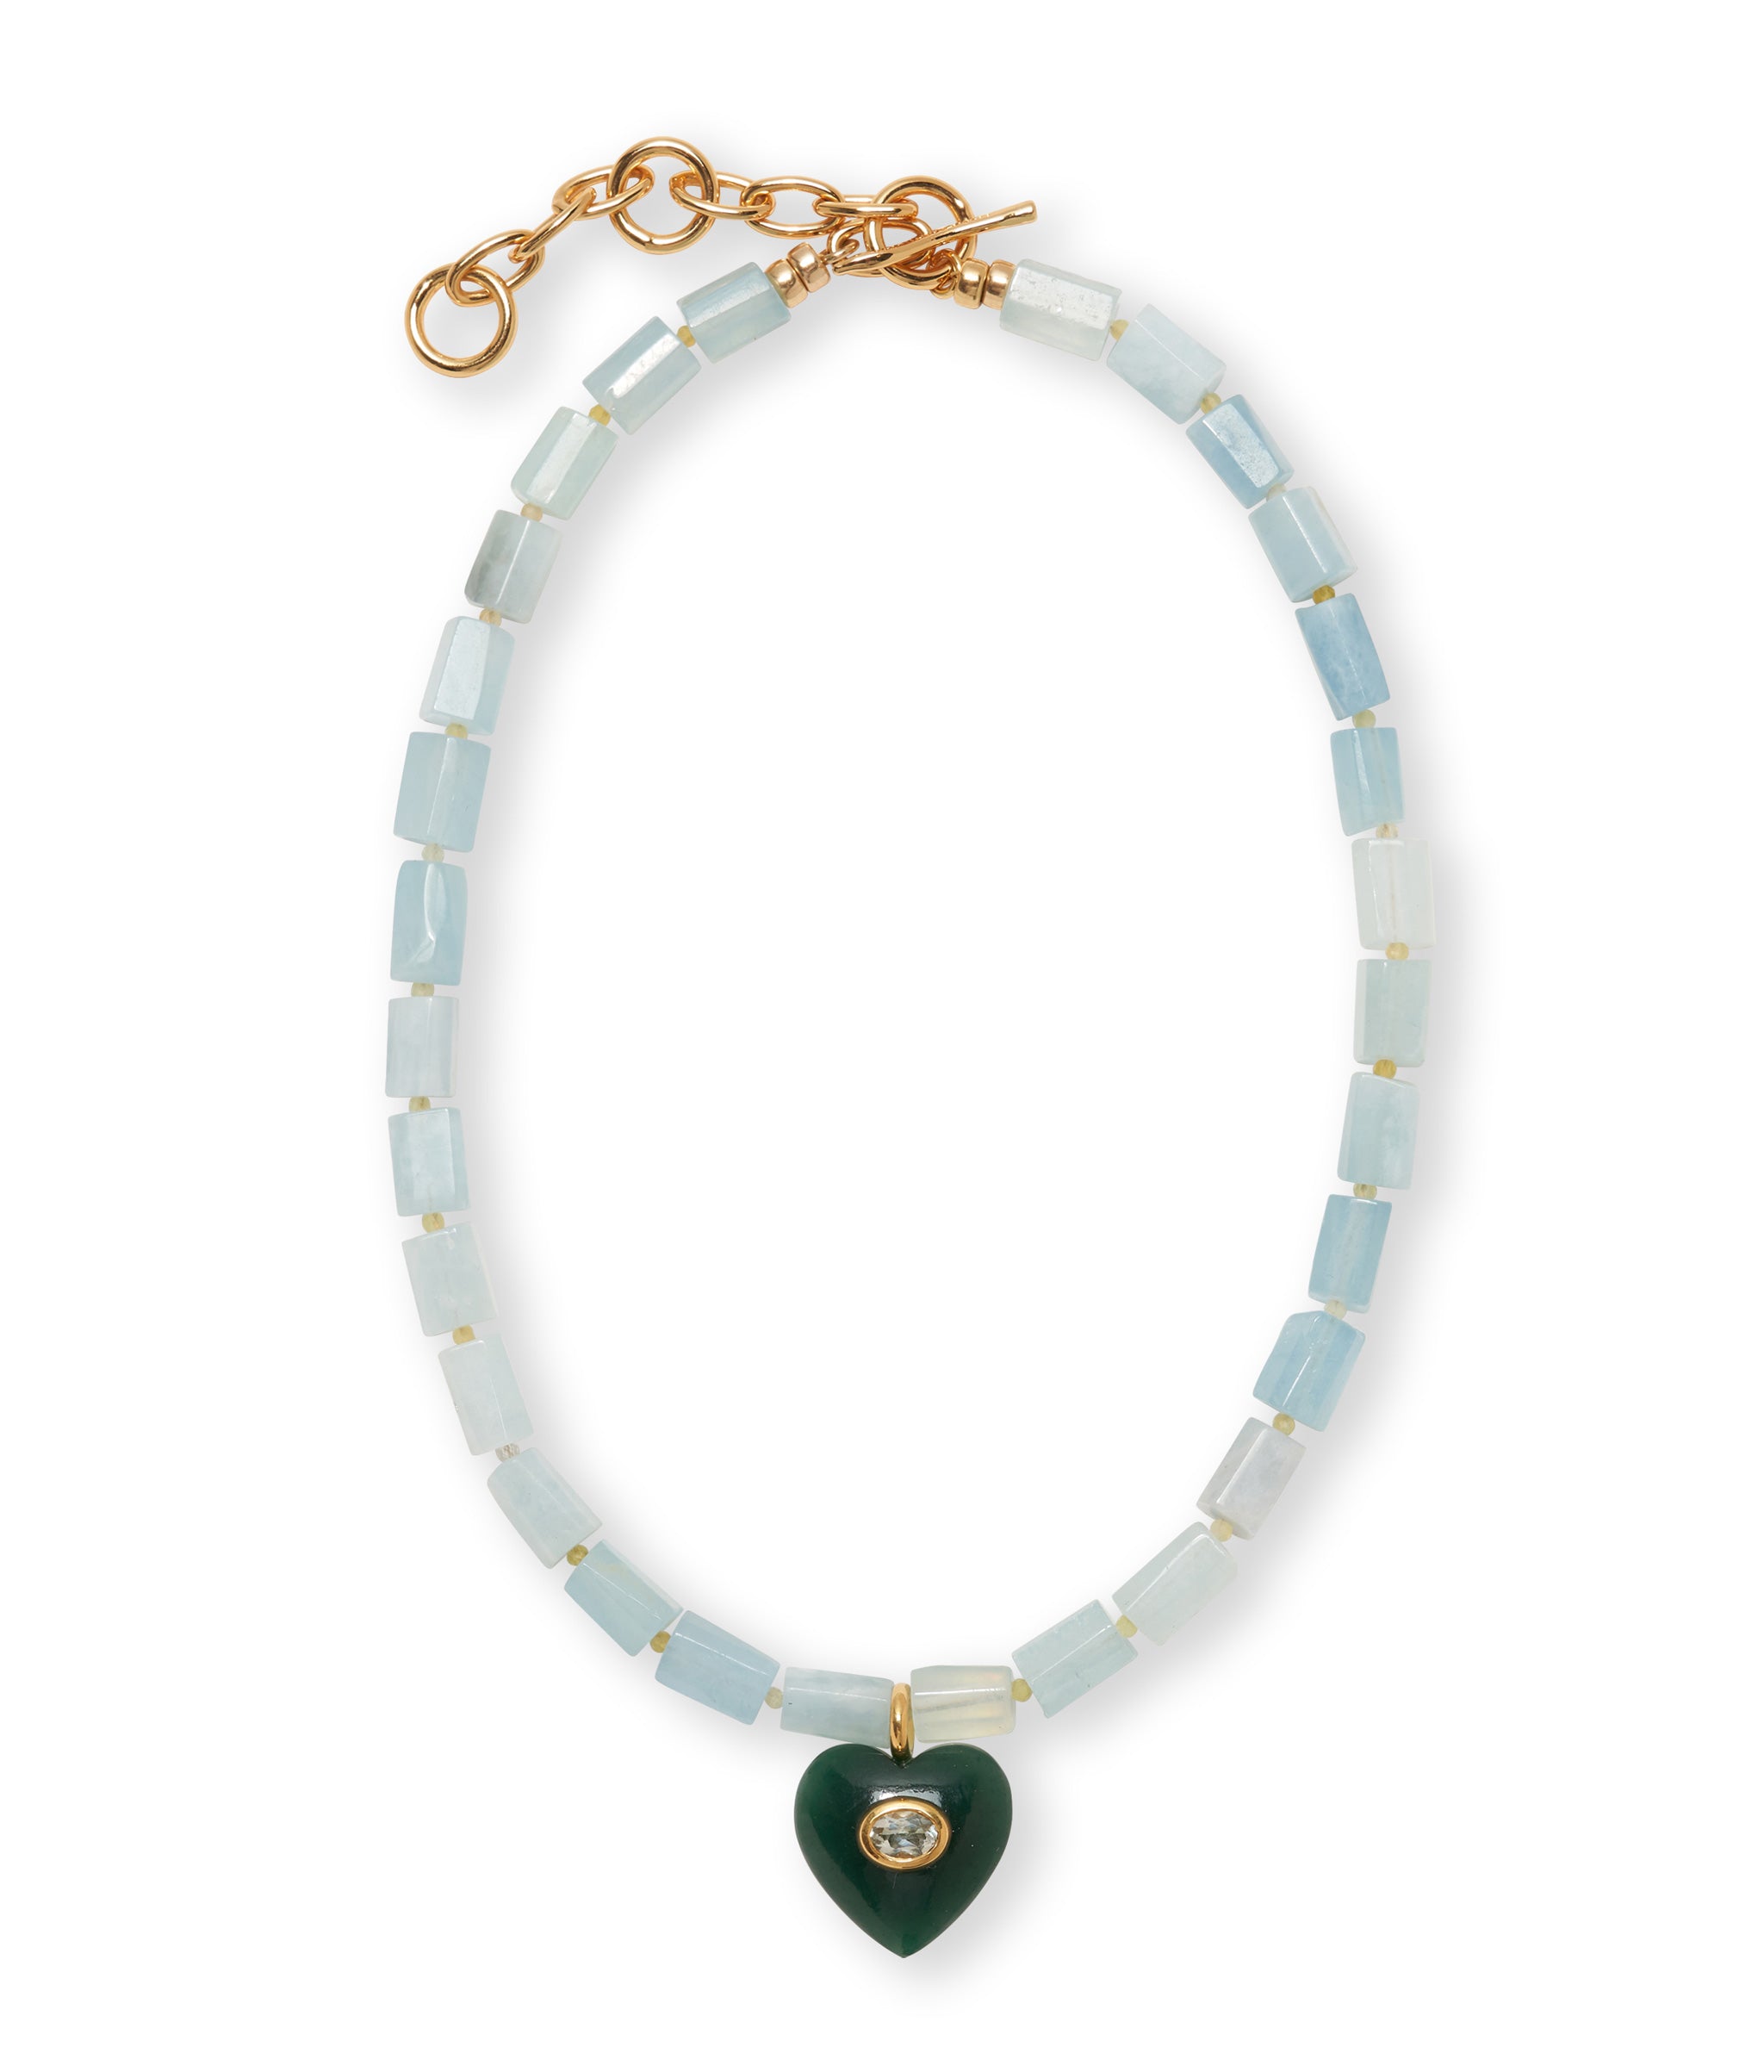 Infatuation Necklace in Jade. Beaded necklace of aquamarine and yellow opal, green jade heart with green amethyst.